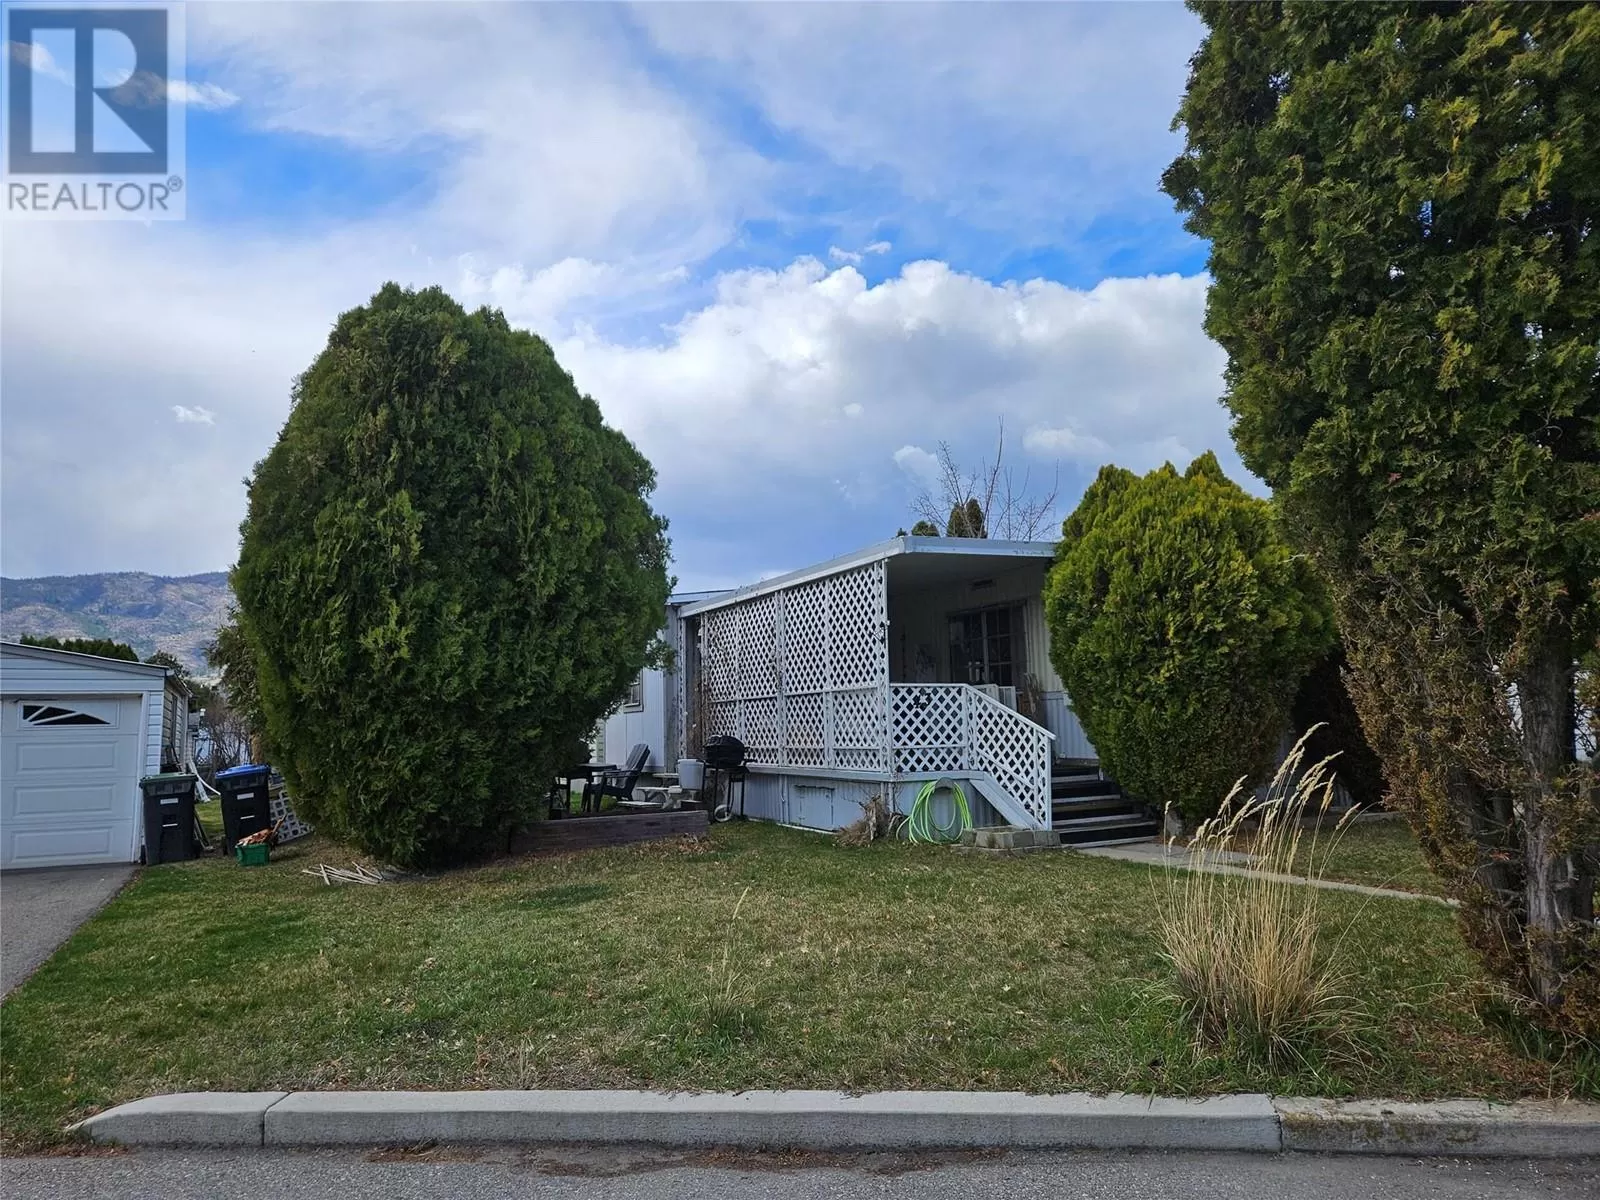 Manufactured Home for rent: 197 Dauphin Avenue Unit# 43, Penticton, British Columbia V2A 3S3